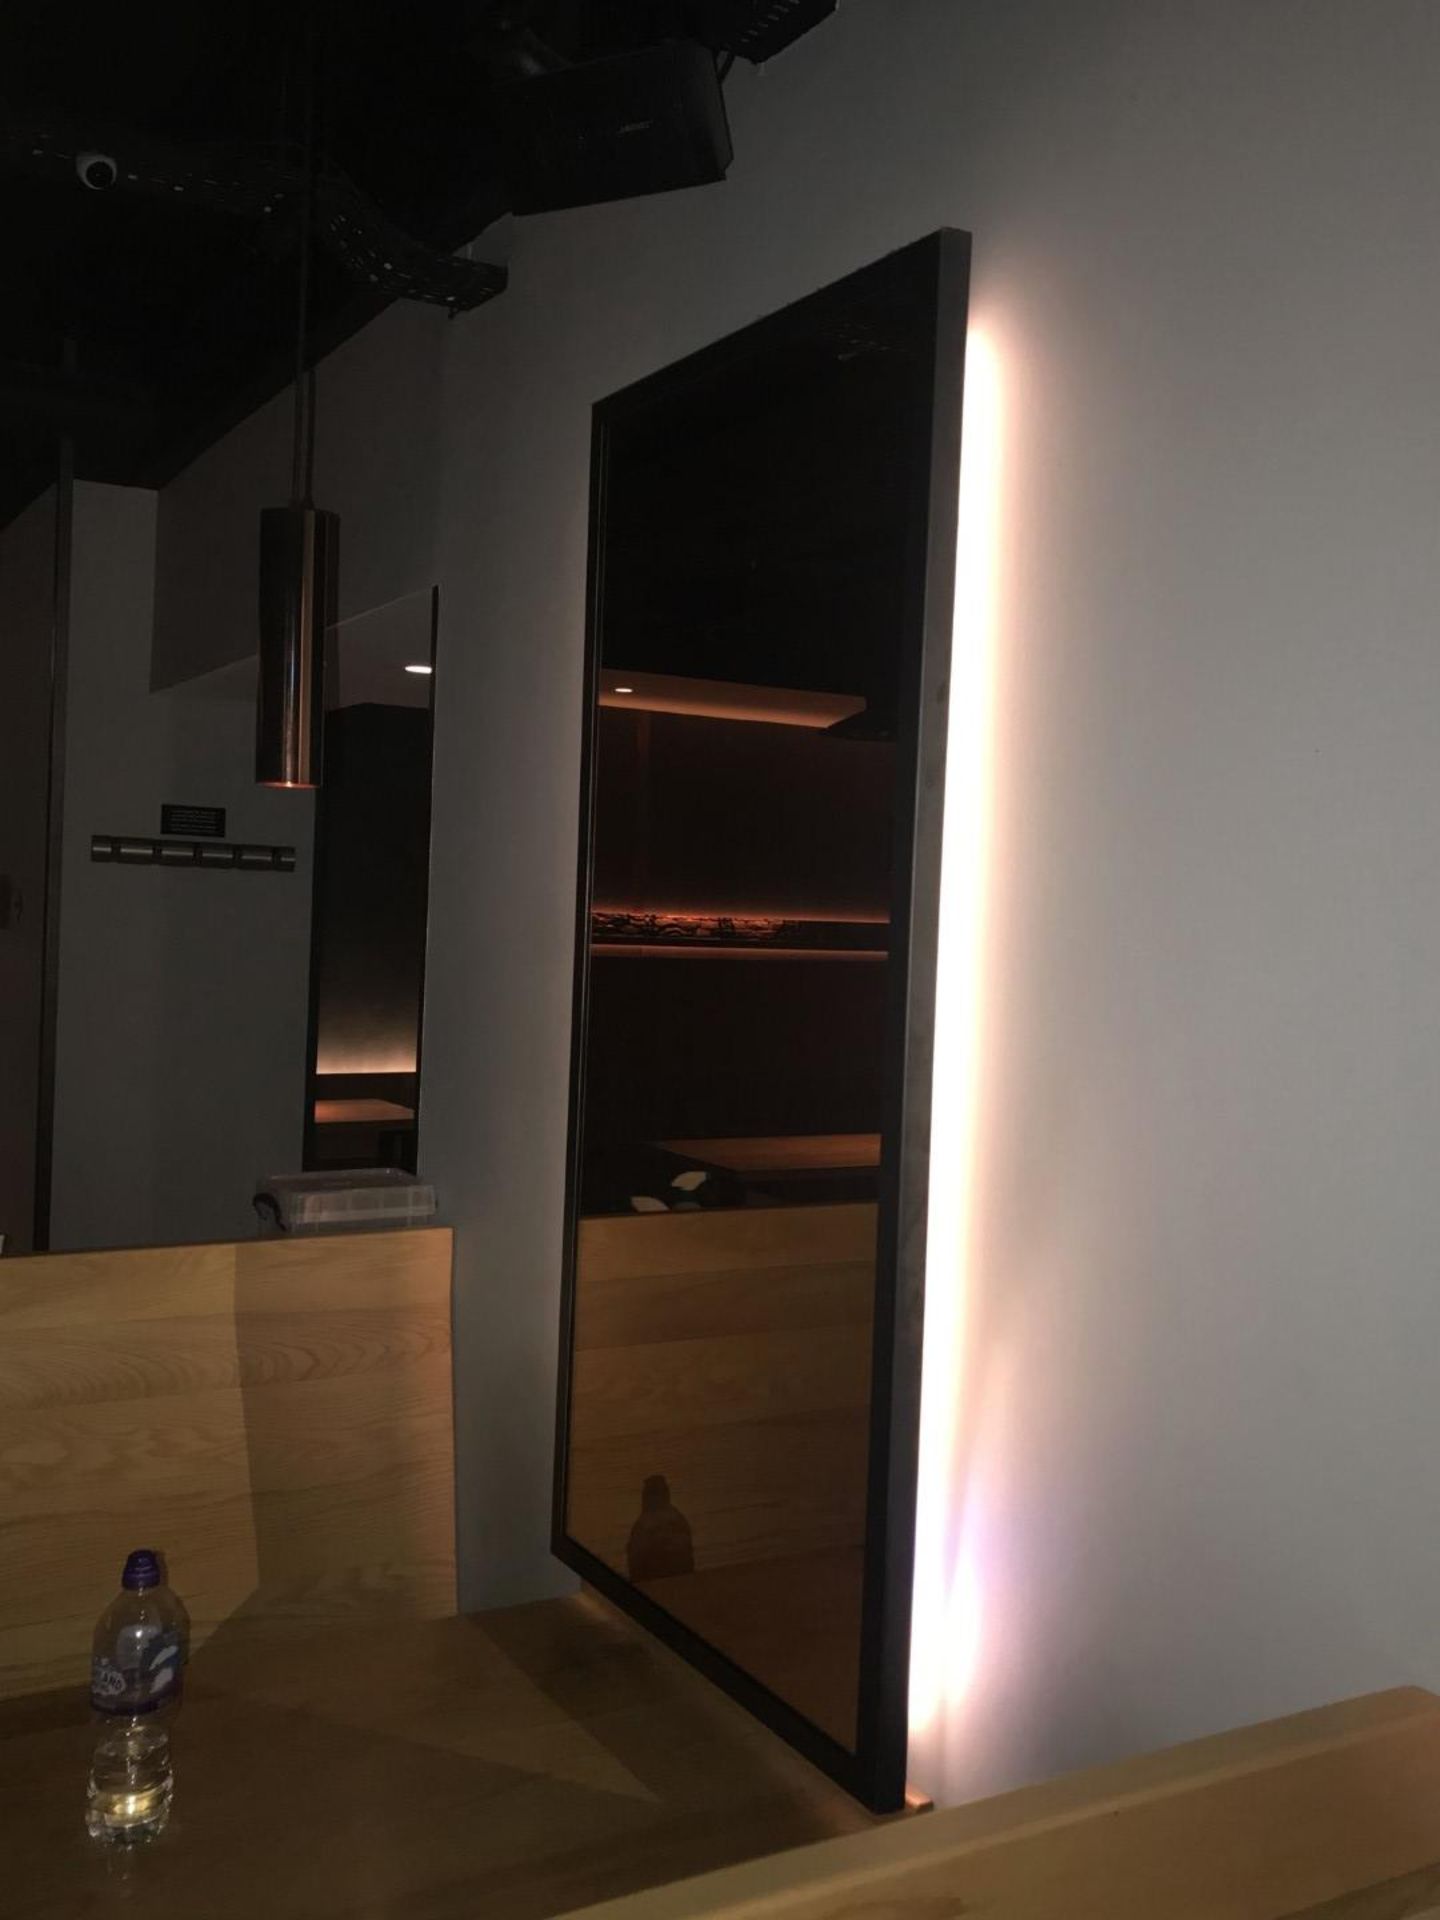 3 x Backlift Wall Mirrors - CL584 - Location: London W1F IN2C12349 - Image 2 of 3